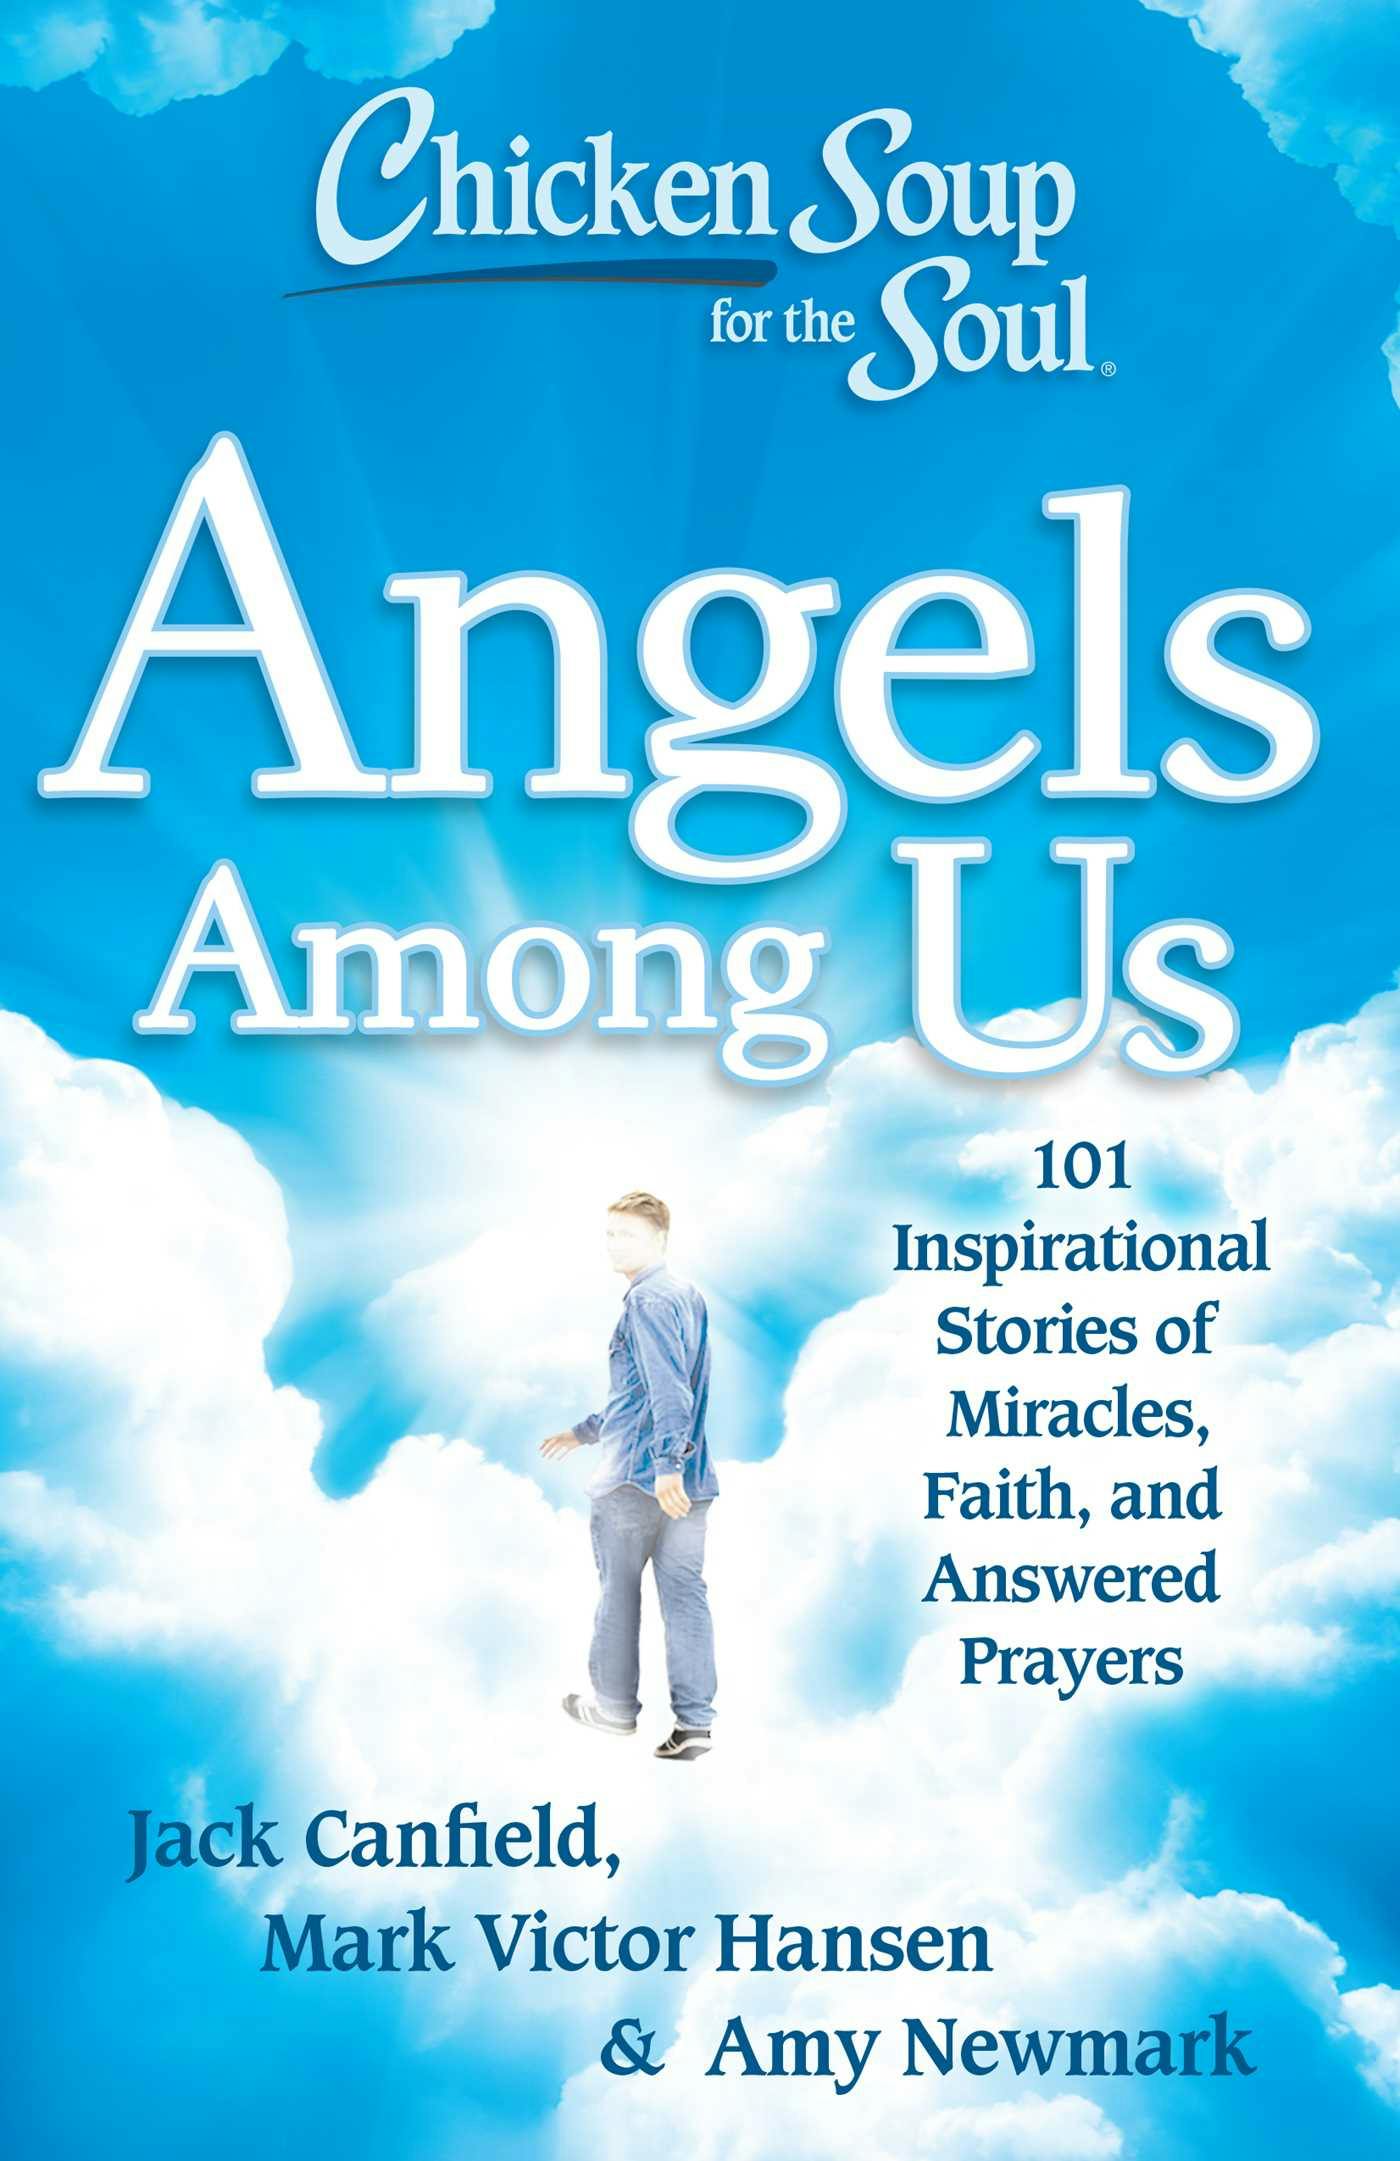 Chicken Soup for the Soul: Angels Among Us: 101 Inspirational Stories of Miracles, Faith, and Answered Prayers - Mark Victor Hansen, Jack Canfield, Amy Newmark